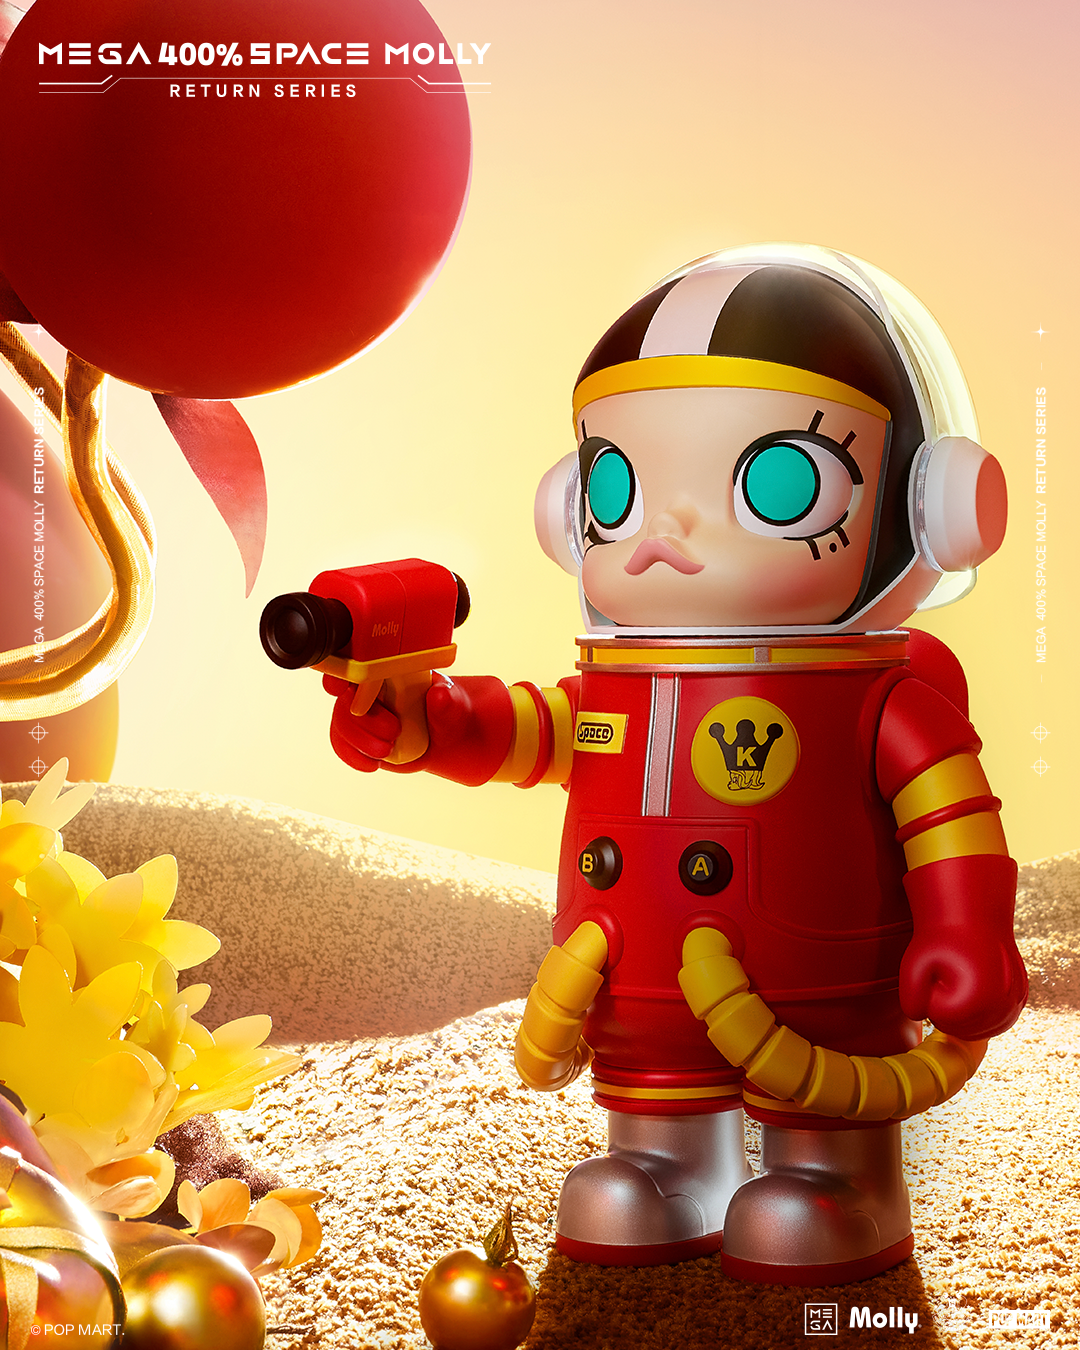 POP MART x Kenny Wong's MEGA Space Molly at DCon UK 2021 - The Toy